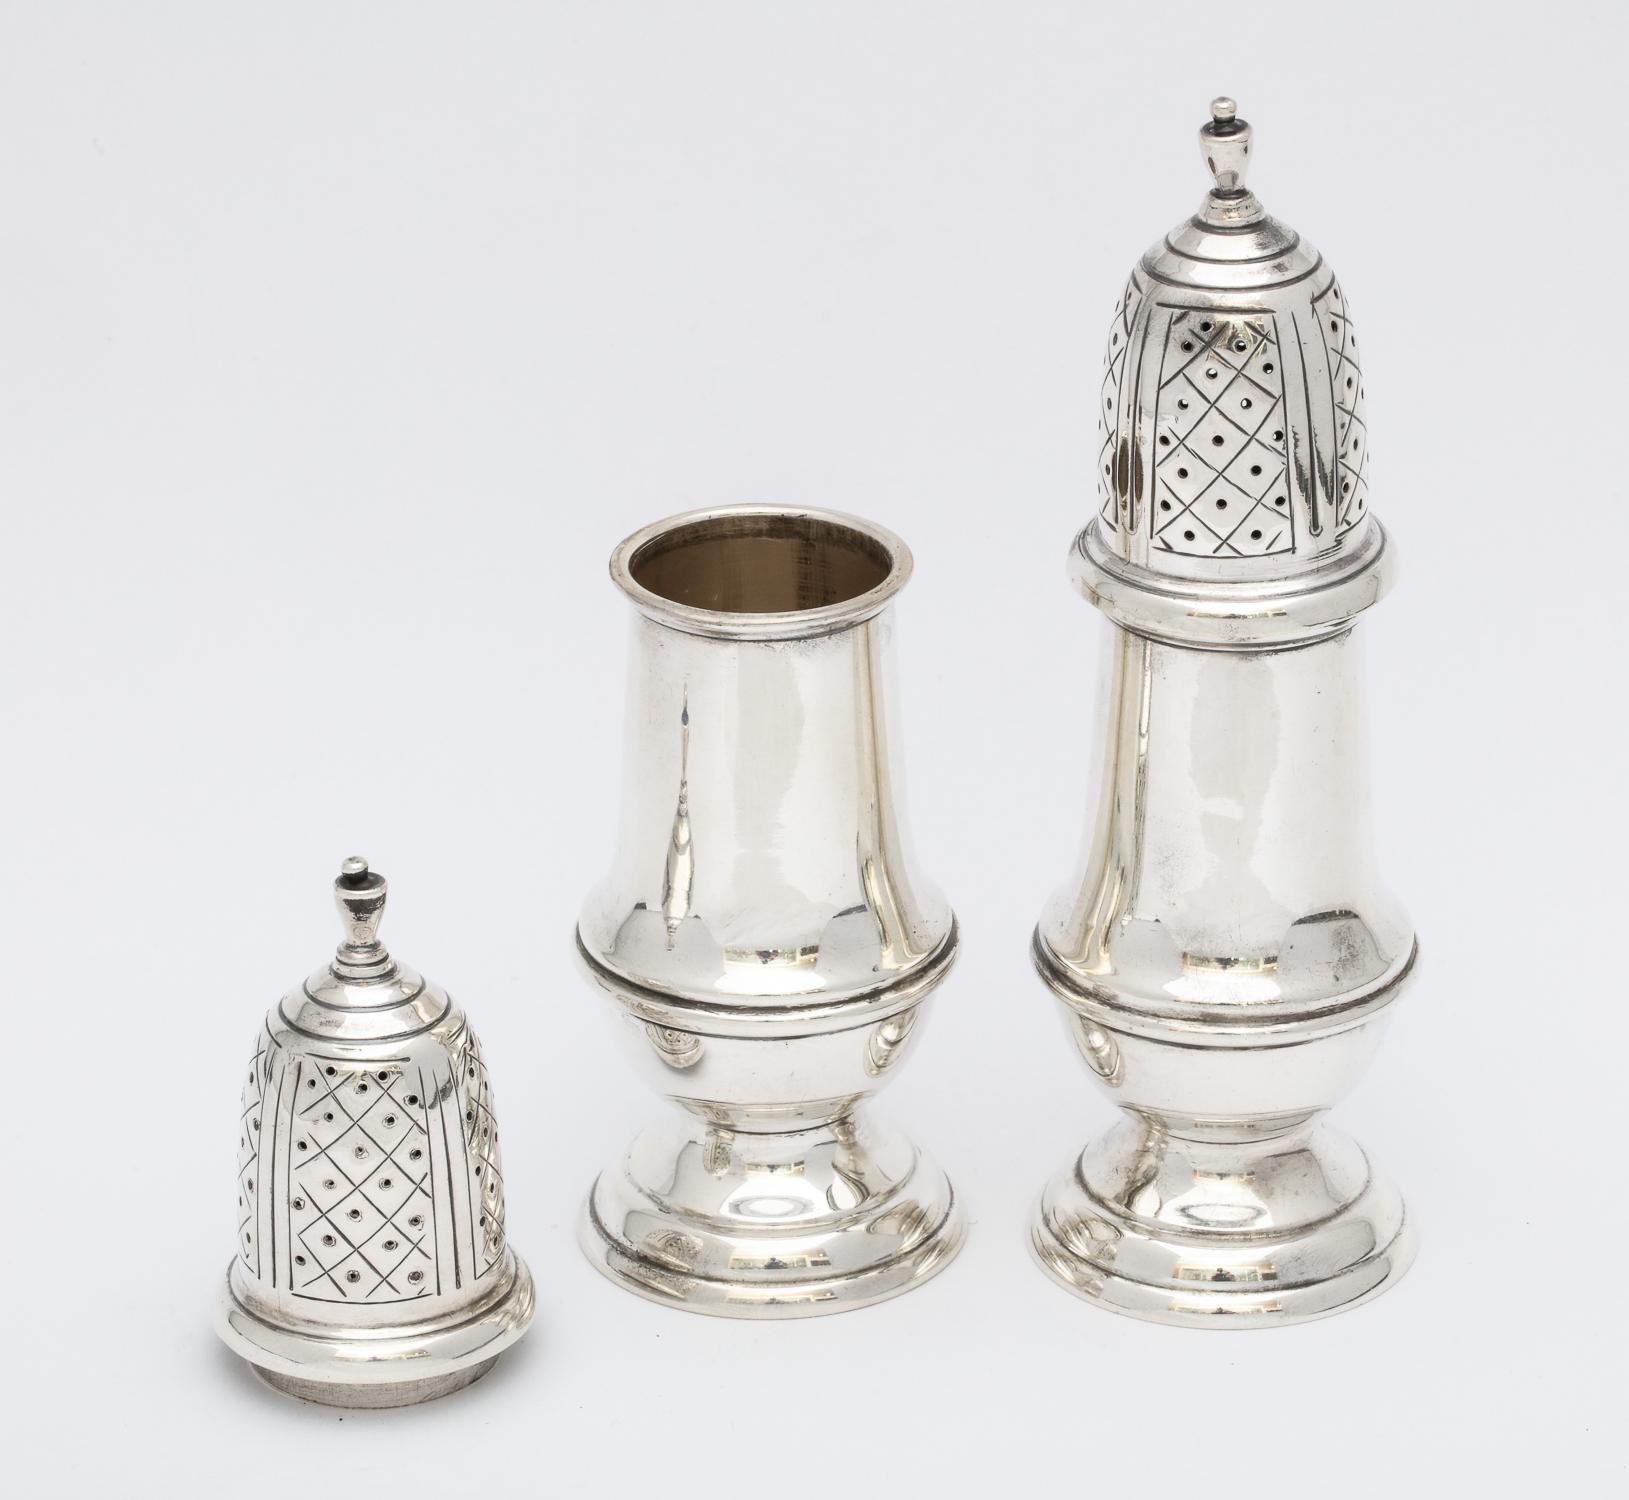 Pair of Sterling Silver American Colonial, Style Salt and Pepper Shaker/Casters 2